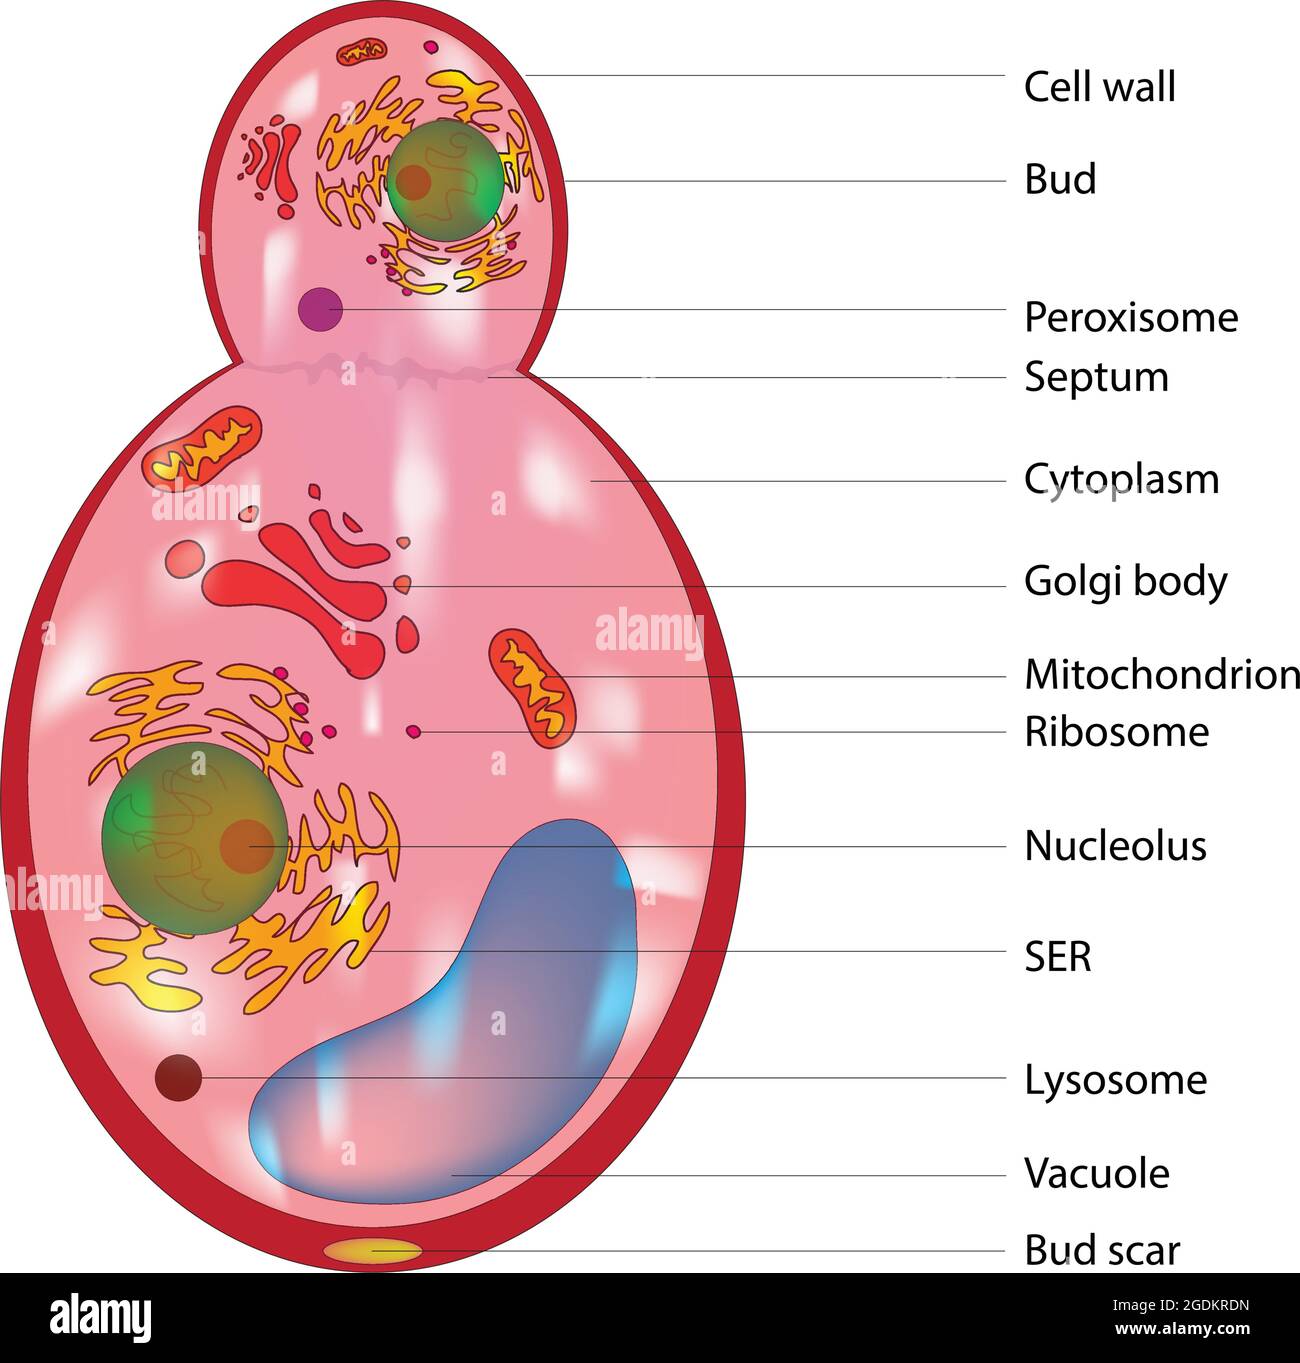 fungal cell vs animal cell